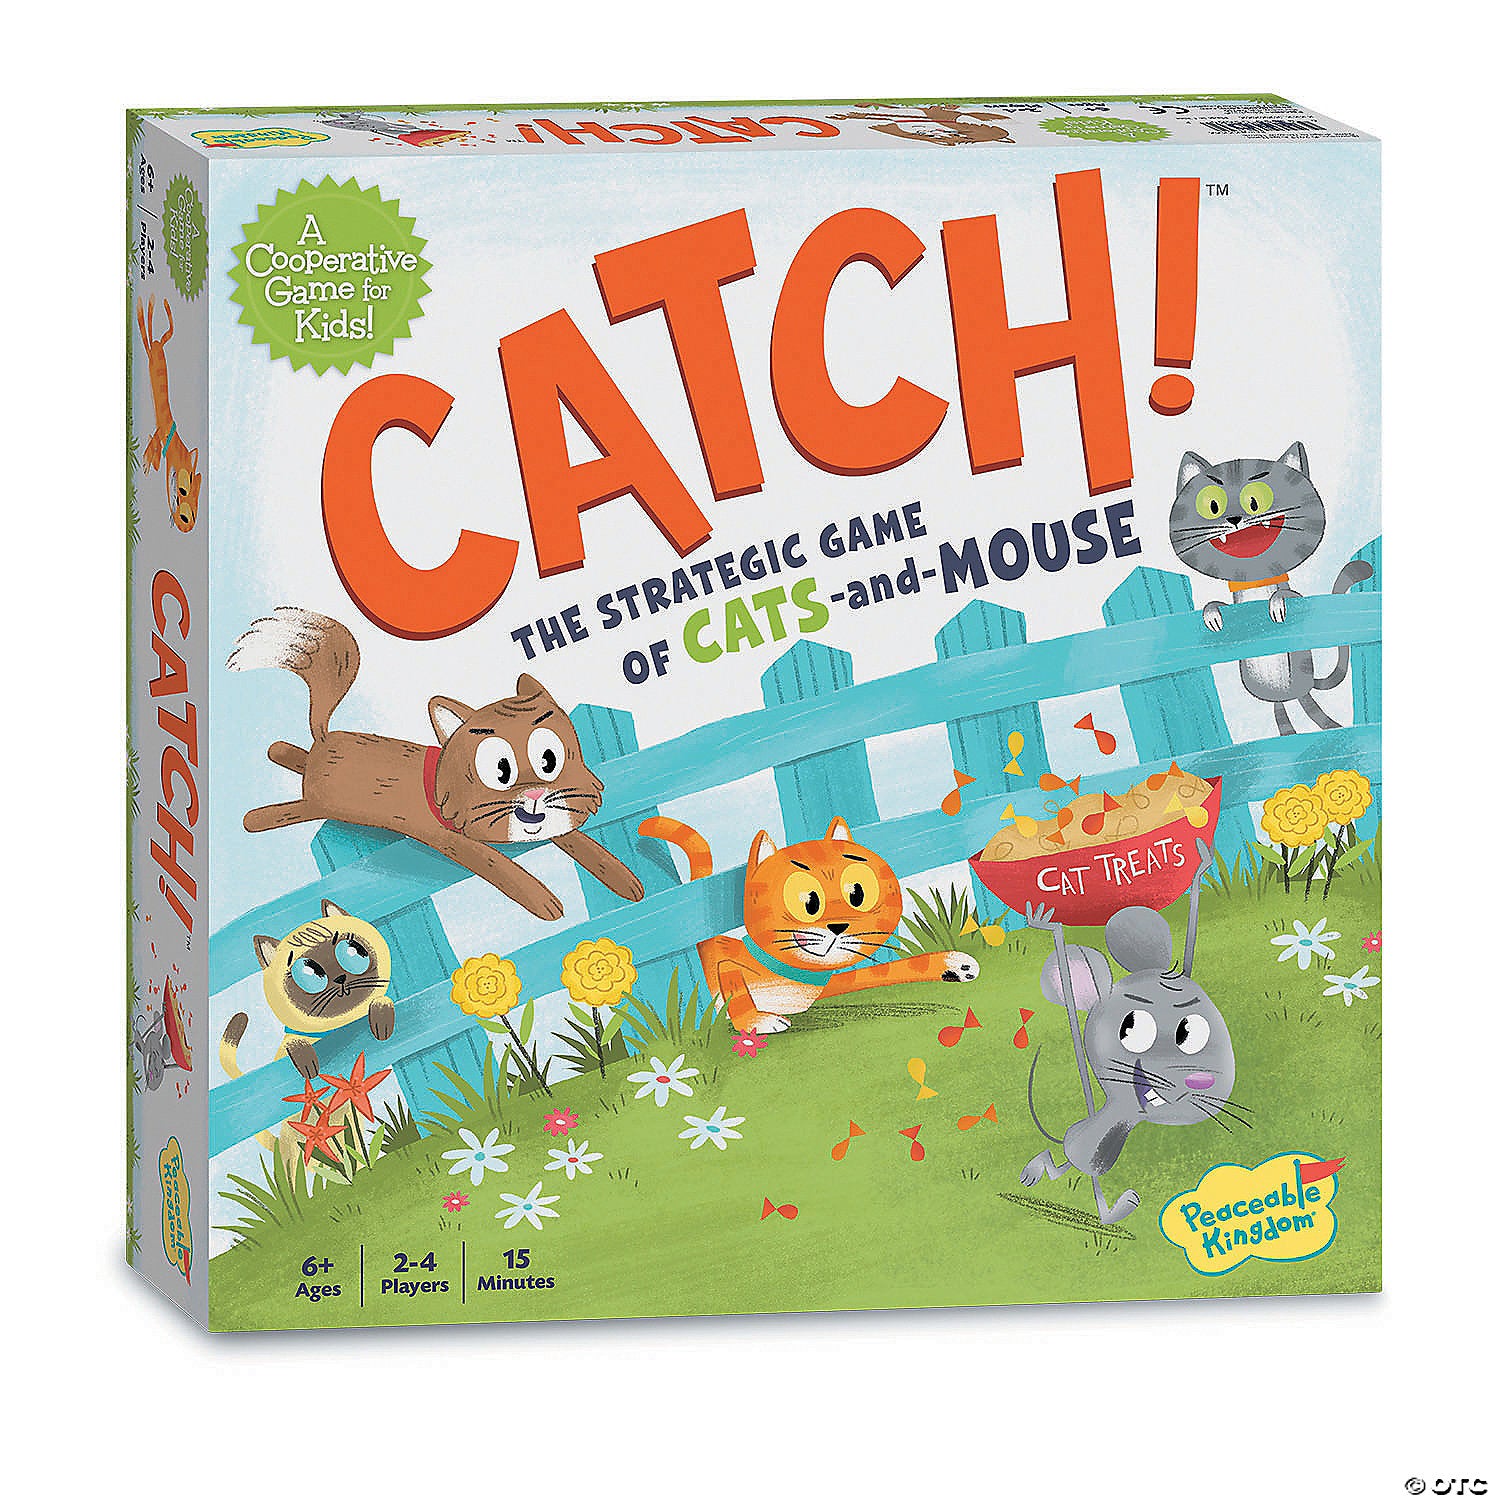 Catch Cooperative Game by Peaceable Kingdom # GMC28